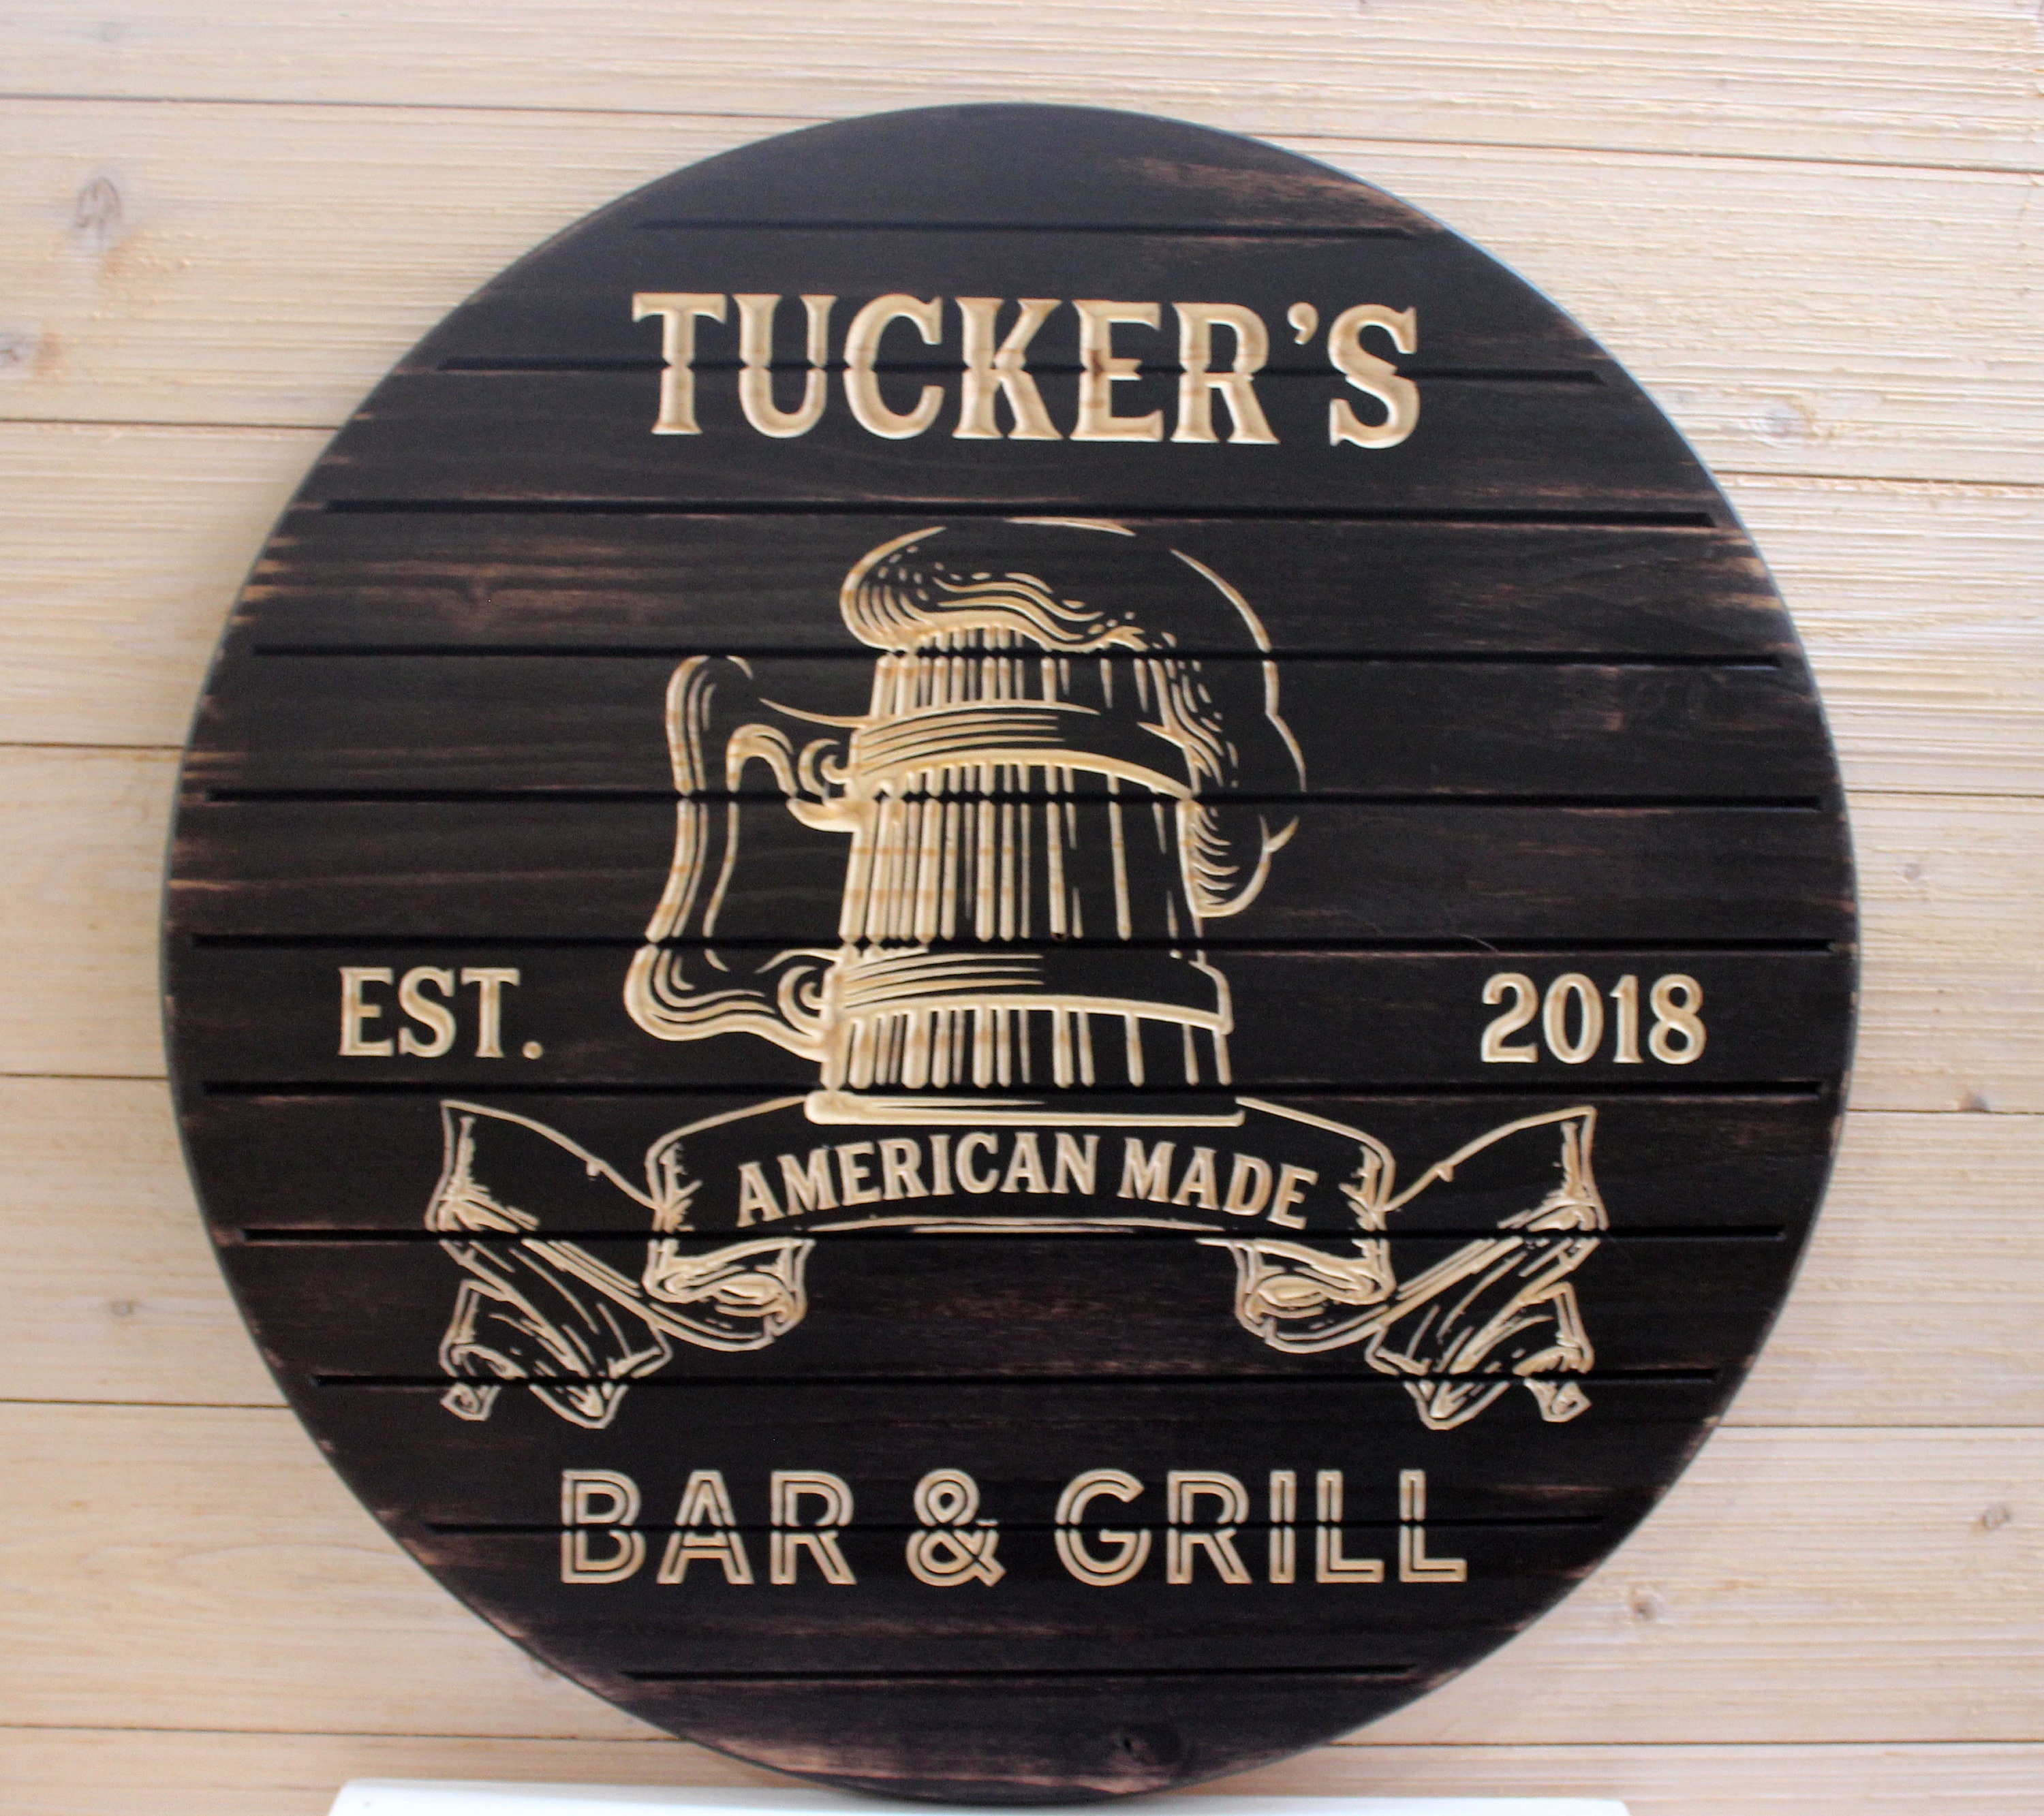 ☆ Bar Accessories, Bar Tools, Bar Products, Personalized Bar Gifts, Signs,  We have a REAL Store! ☆